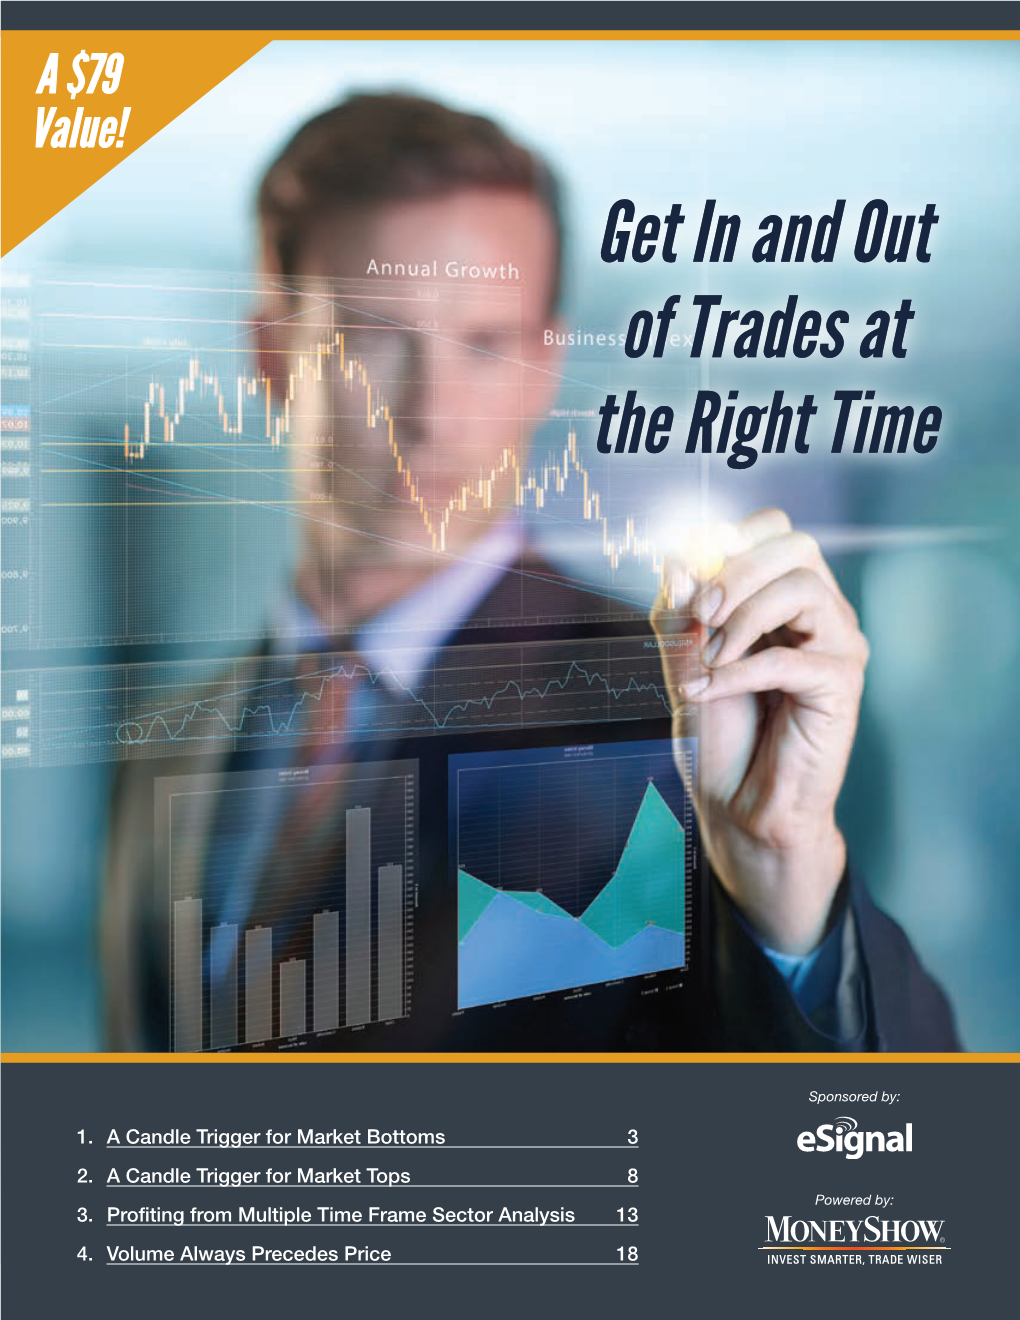 Get in and out of Trades at the Right Time